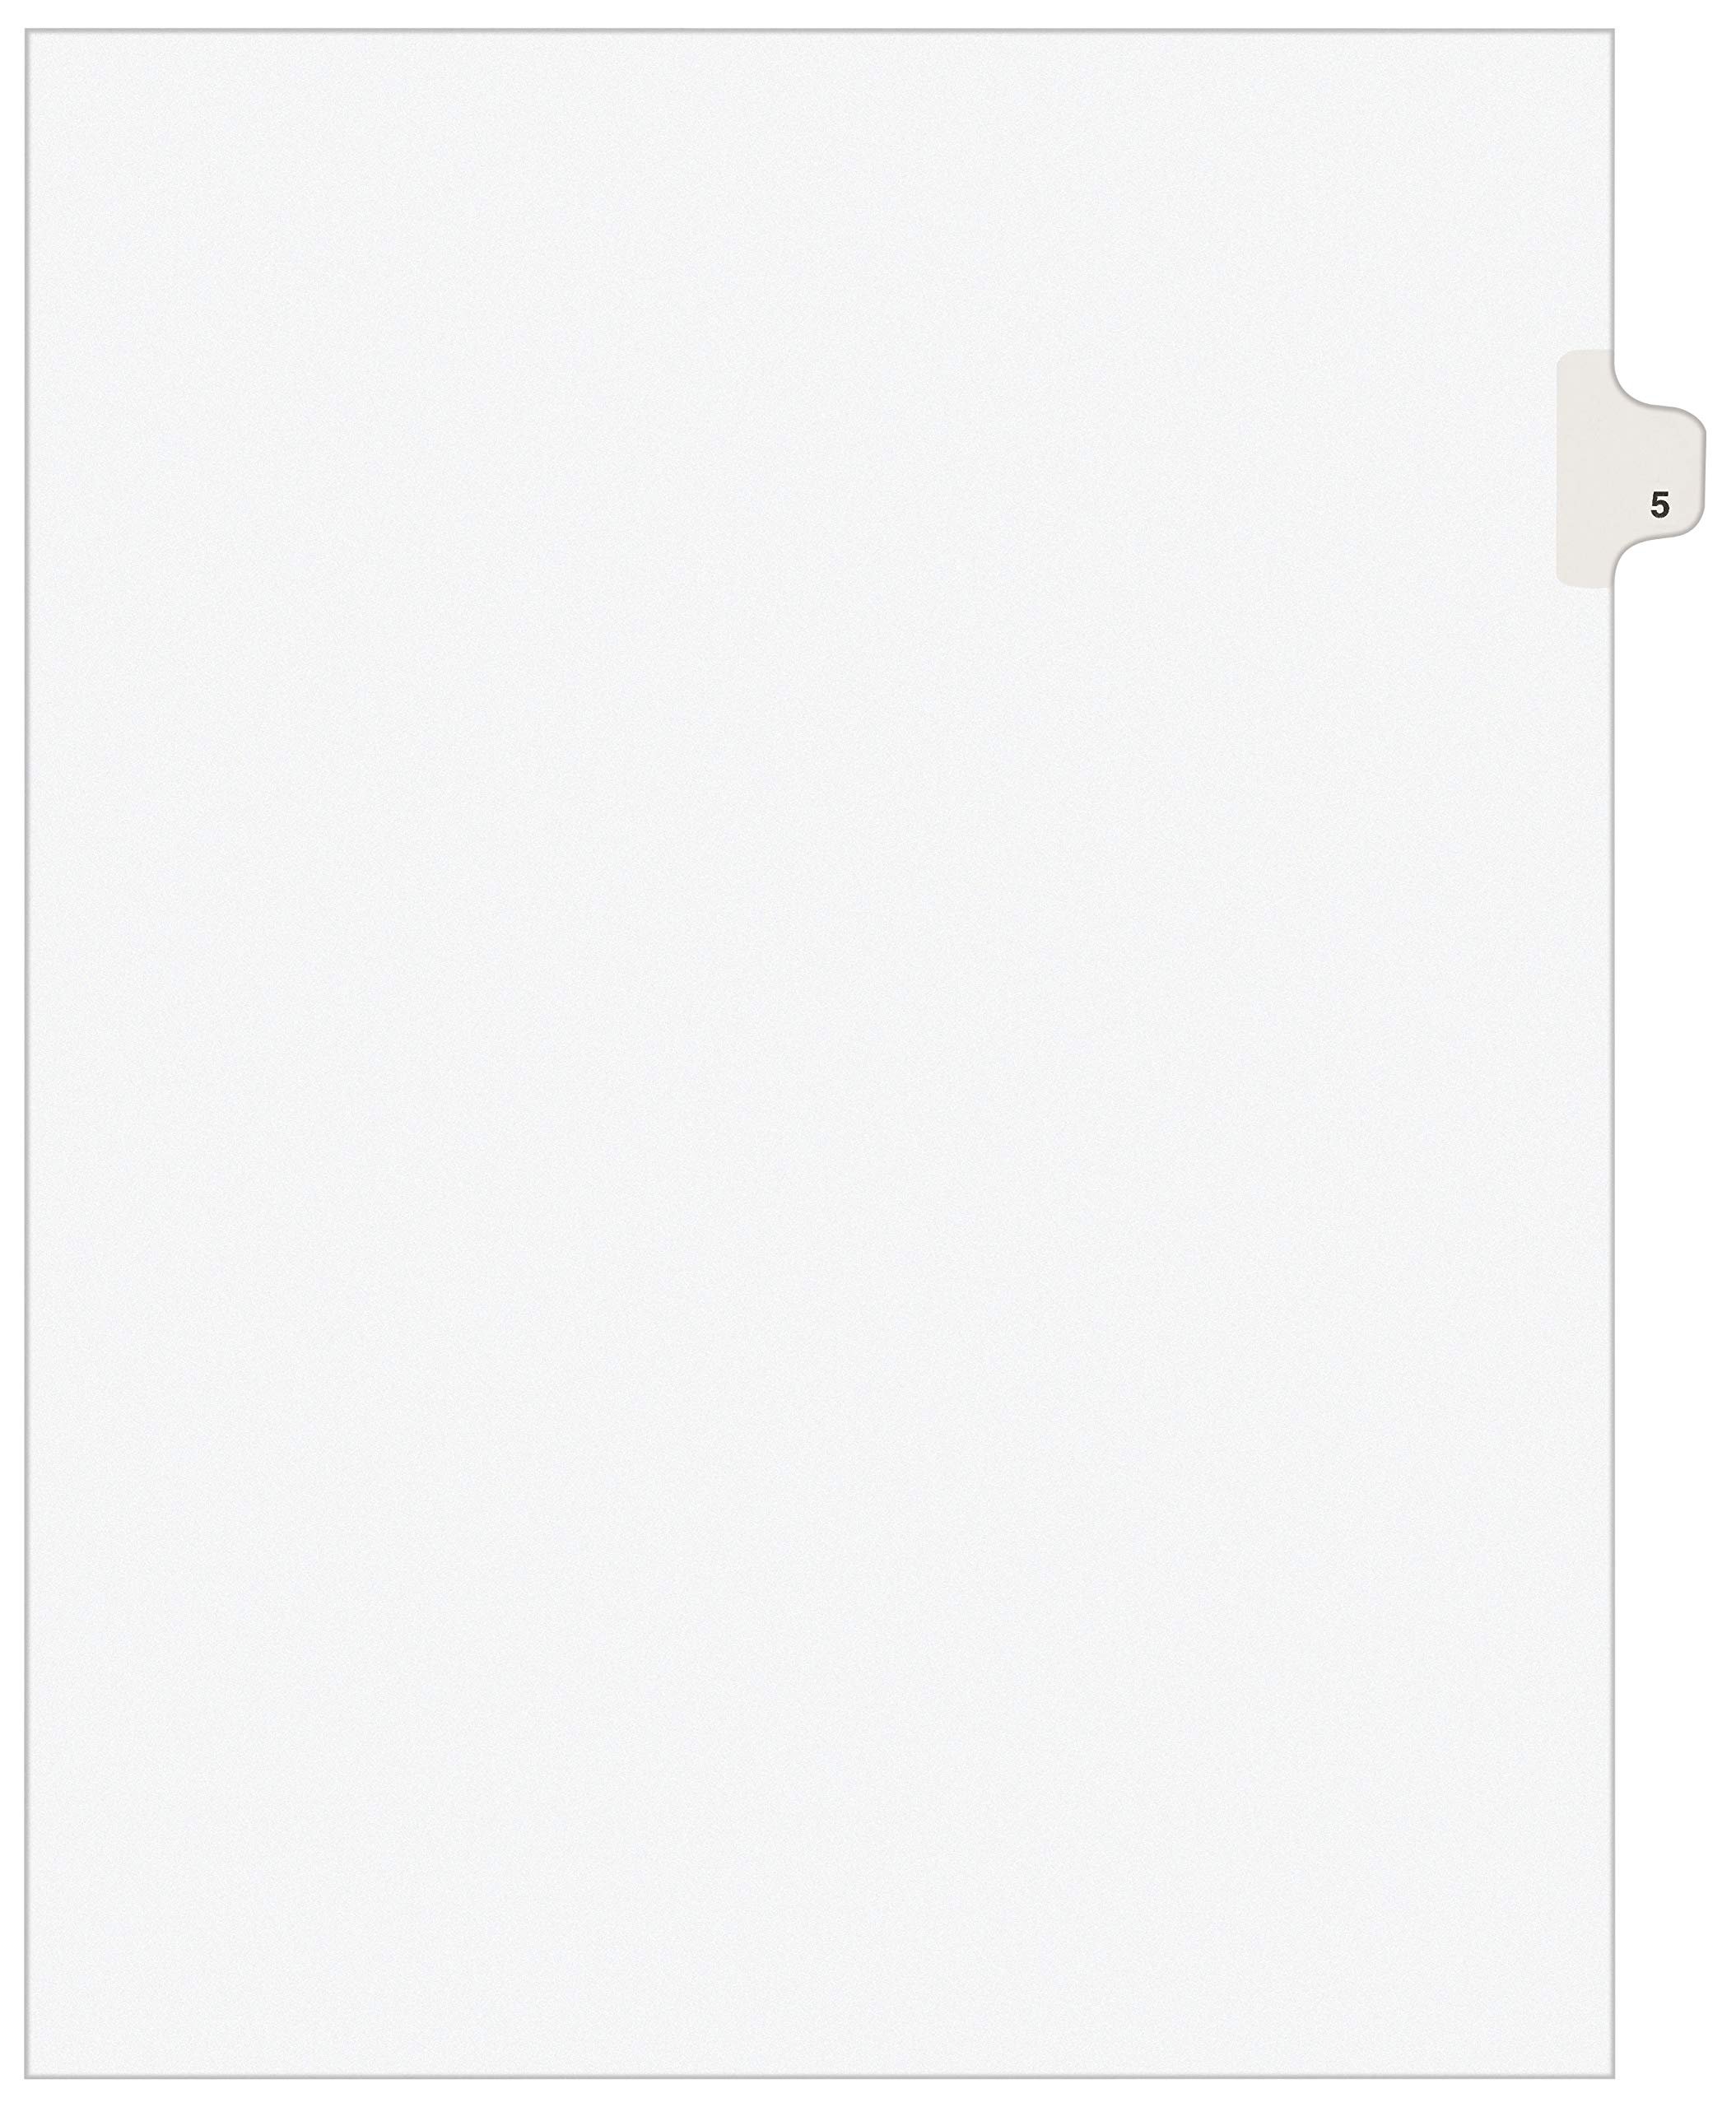 Book Cover Avery Individual Legal Exhibit Dividers, Avery Style, 5, Side Tab, 8.5 x 11 inches, Pack of 25 (11915), White